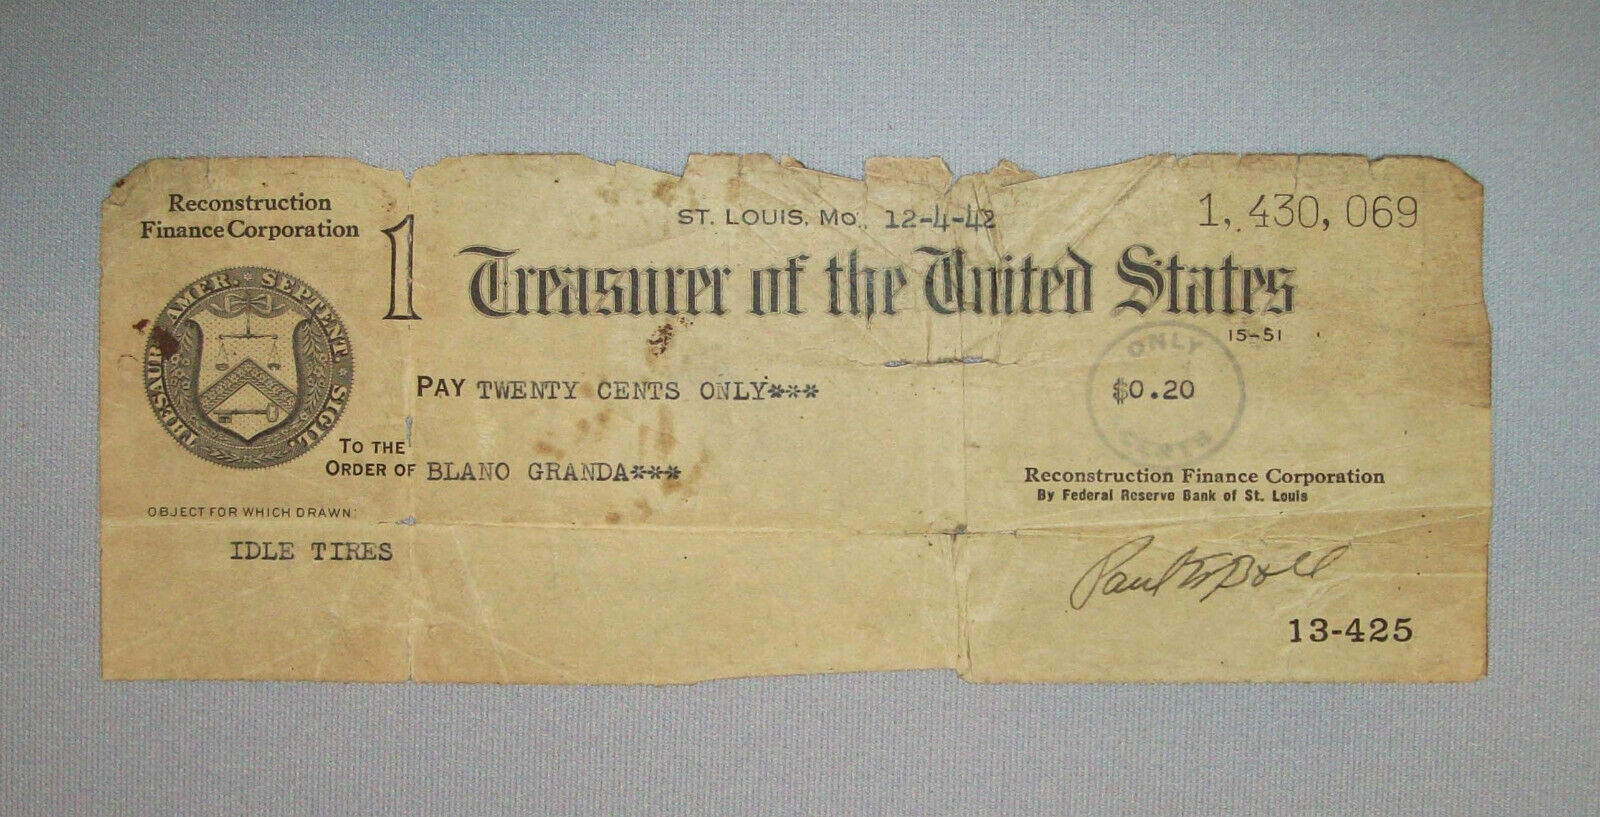 WWII Vtg 1942 US Treasury Check .20 Cents For Idle Tires WWII Rubber Drive